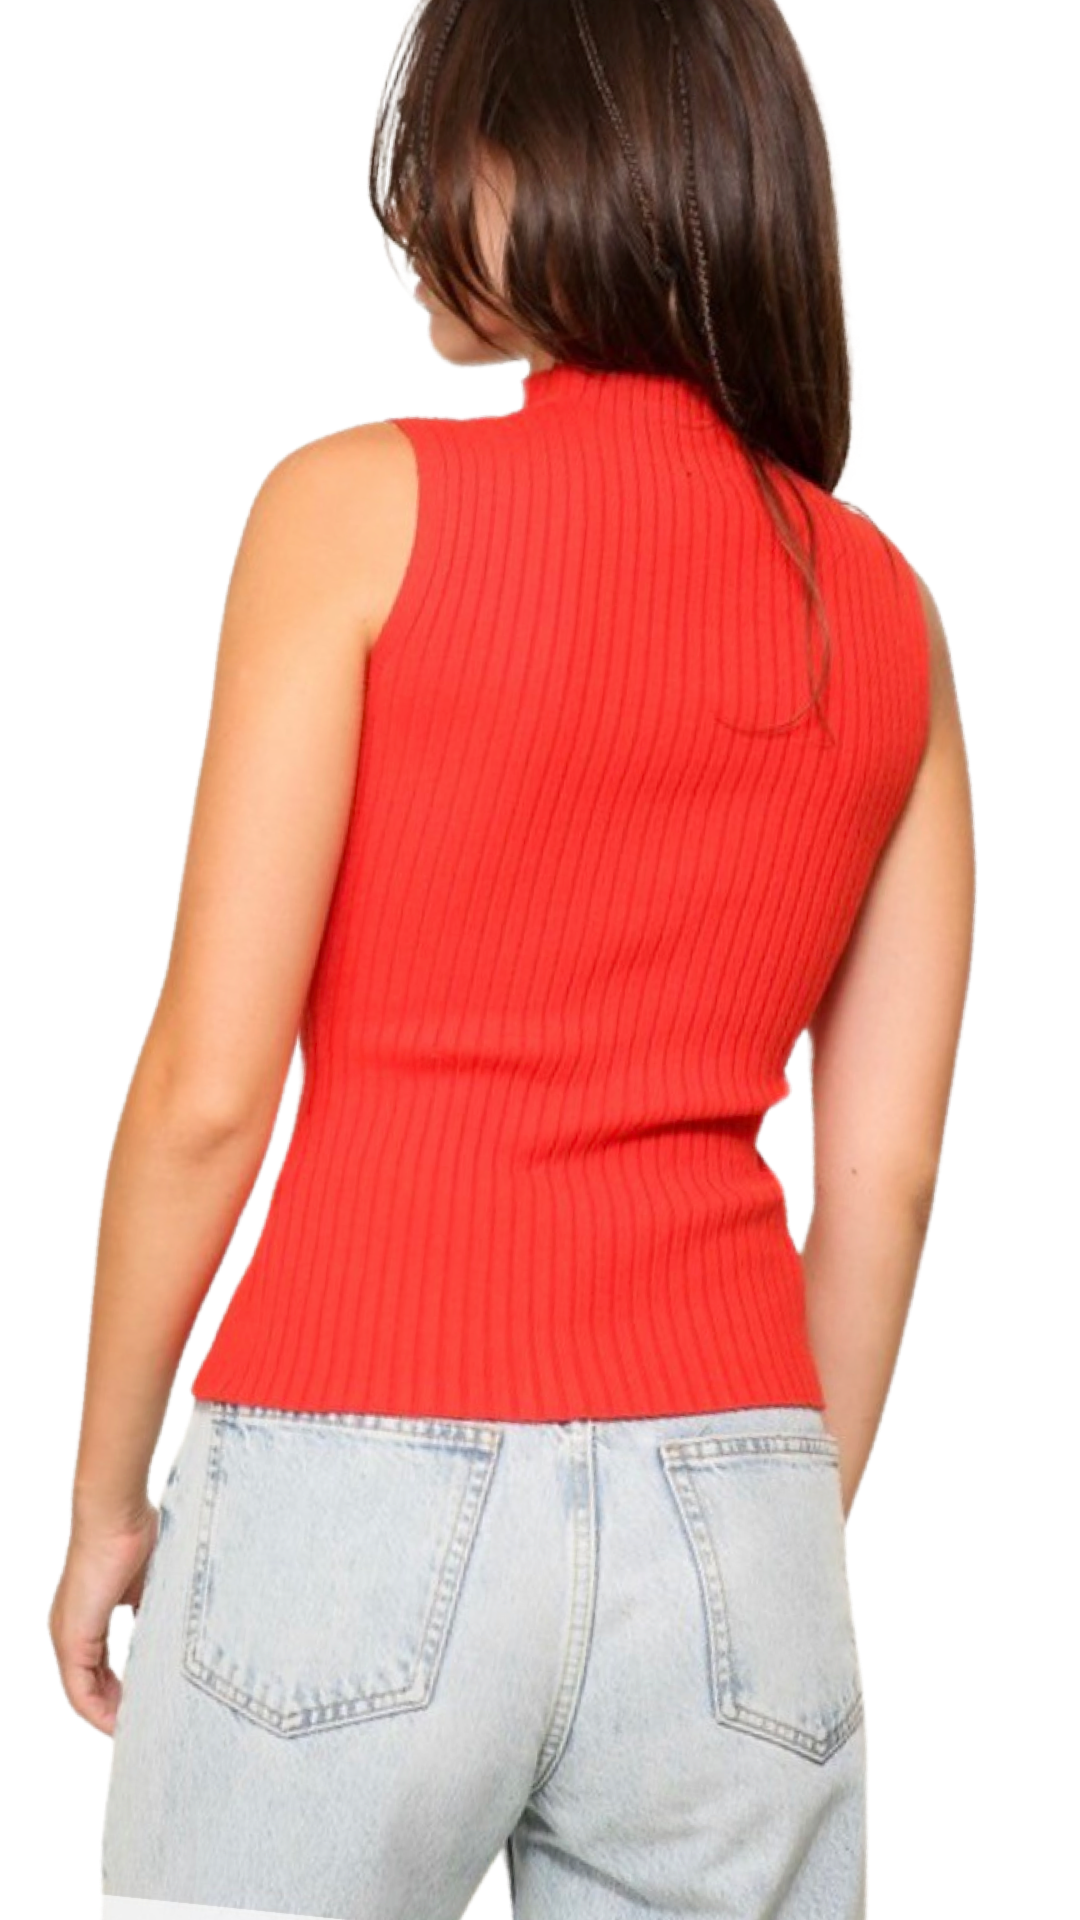 Apparel- Timing Sweater Ribbed Keyhole Knit Top